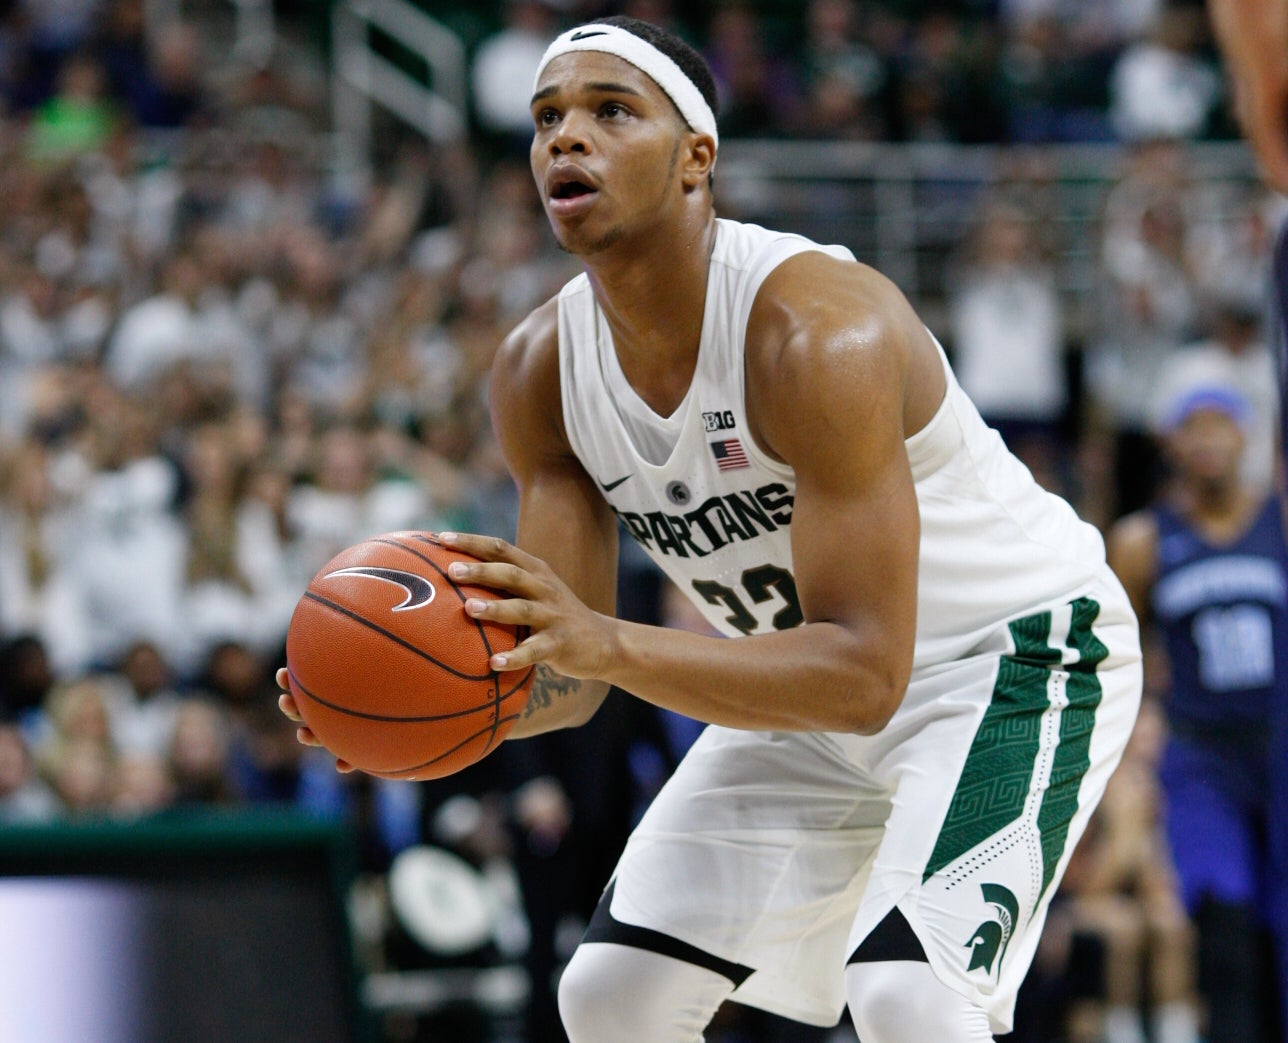 Miles Bridges, Michigan State's star, is worth believing. Here's why.